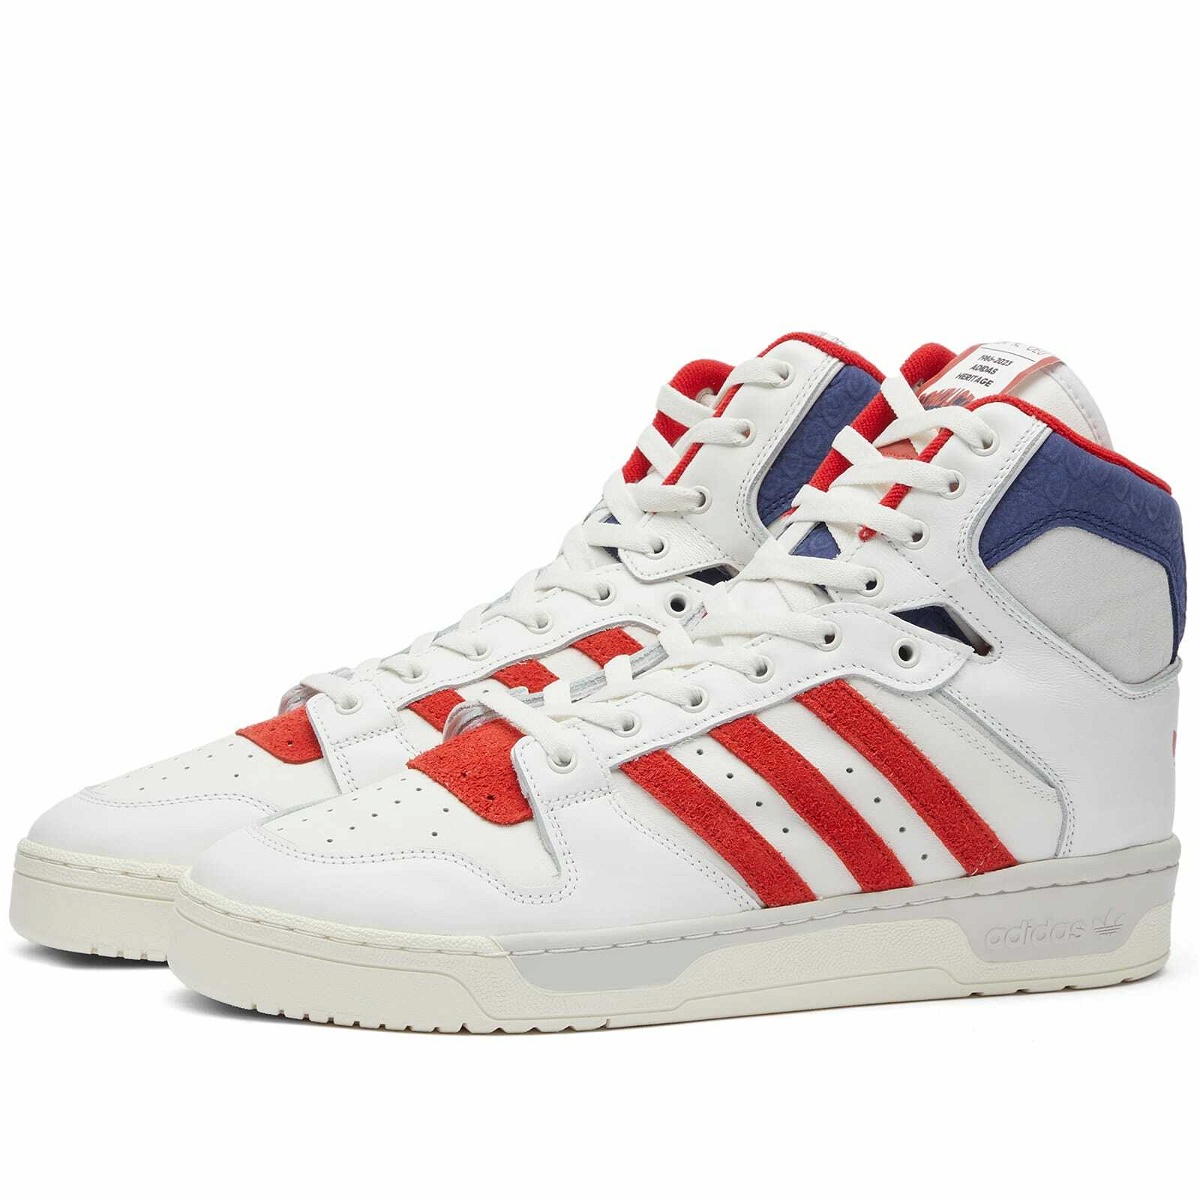 Adidas Conductor Hi-Top Sneakers in Core White/Scarlet/Grey adidas